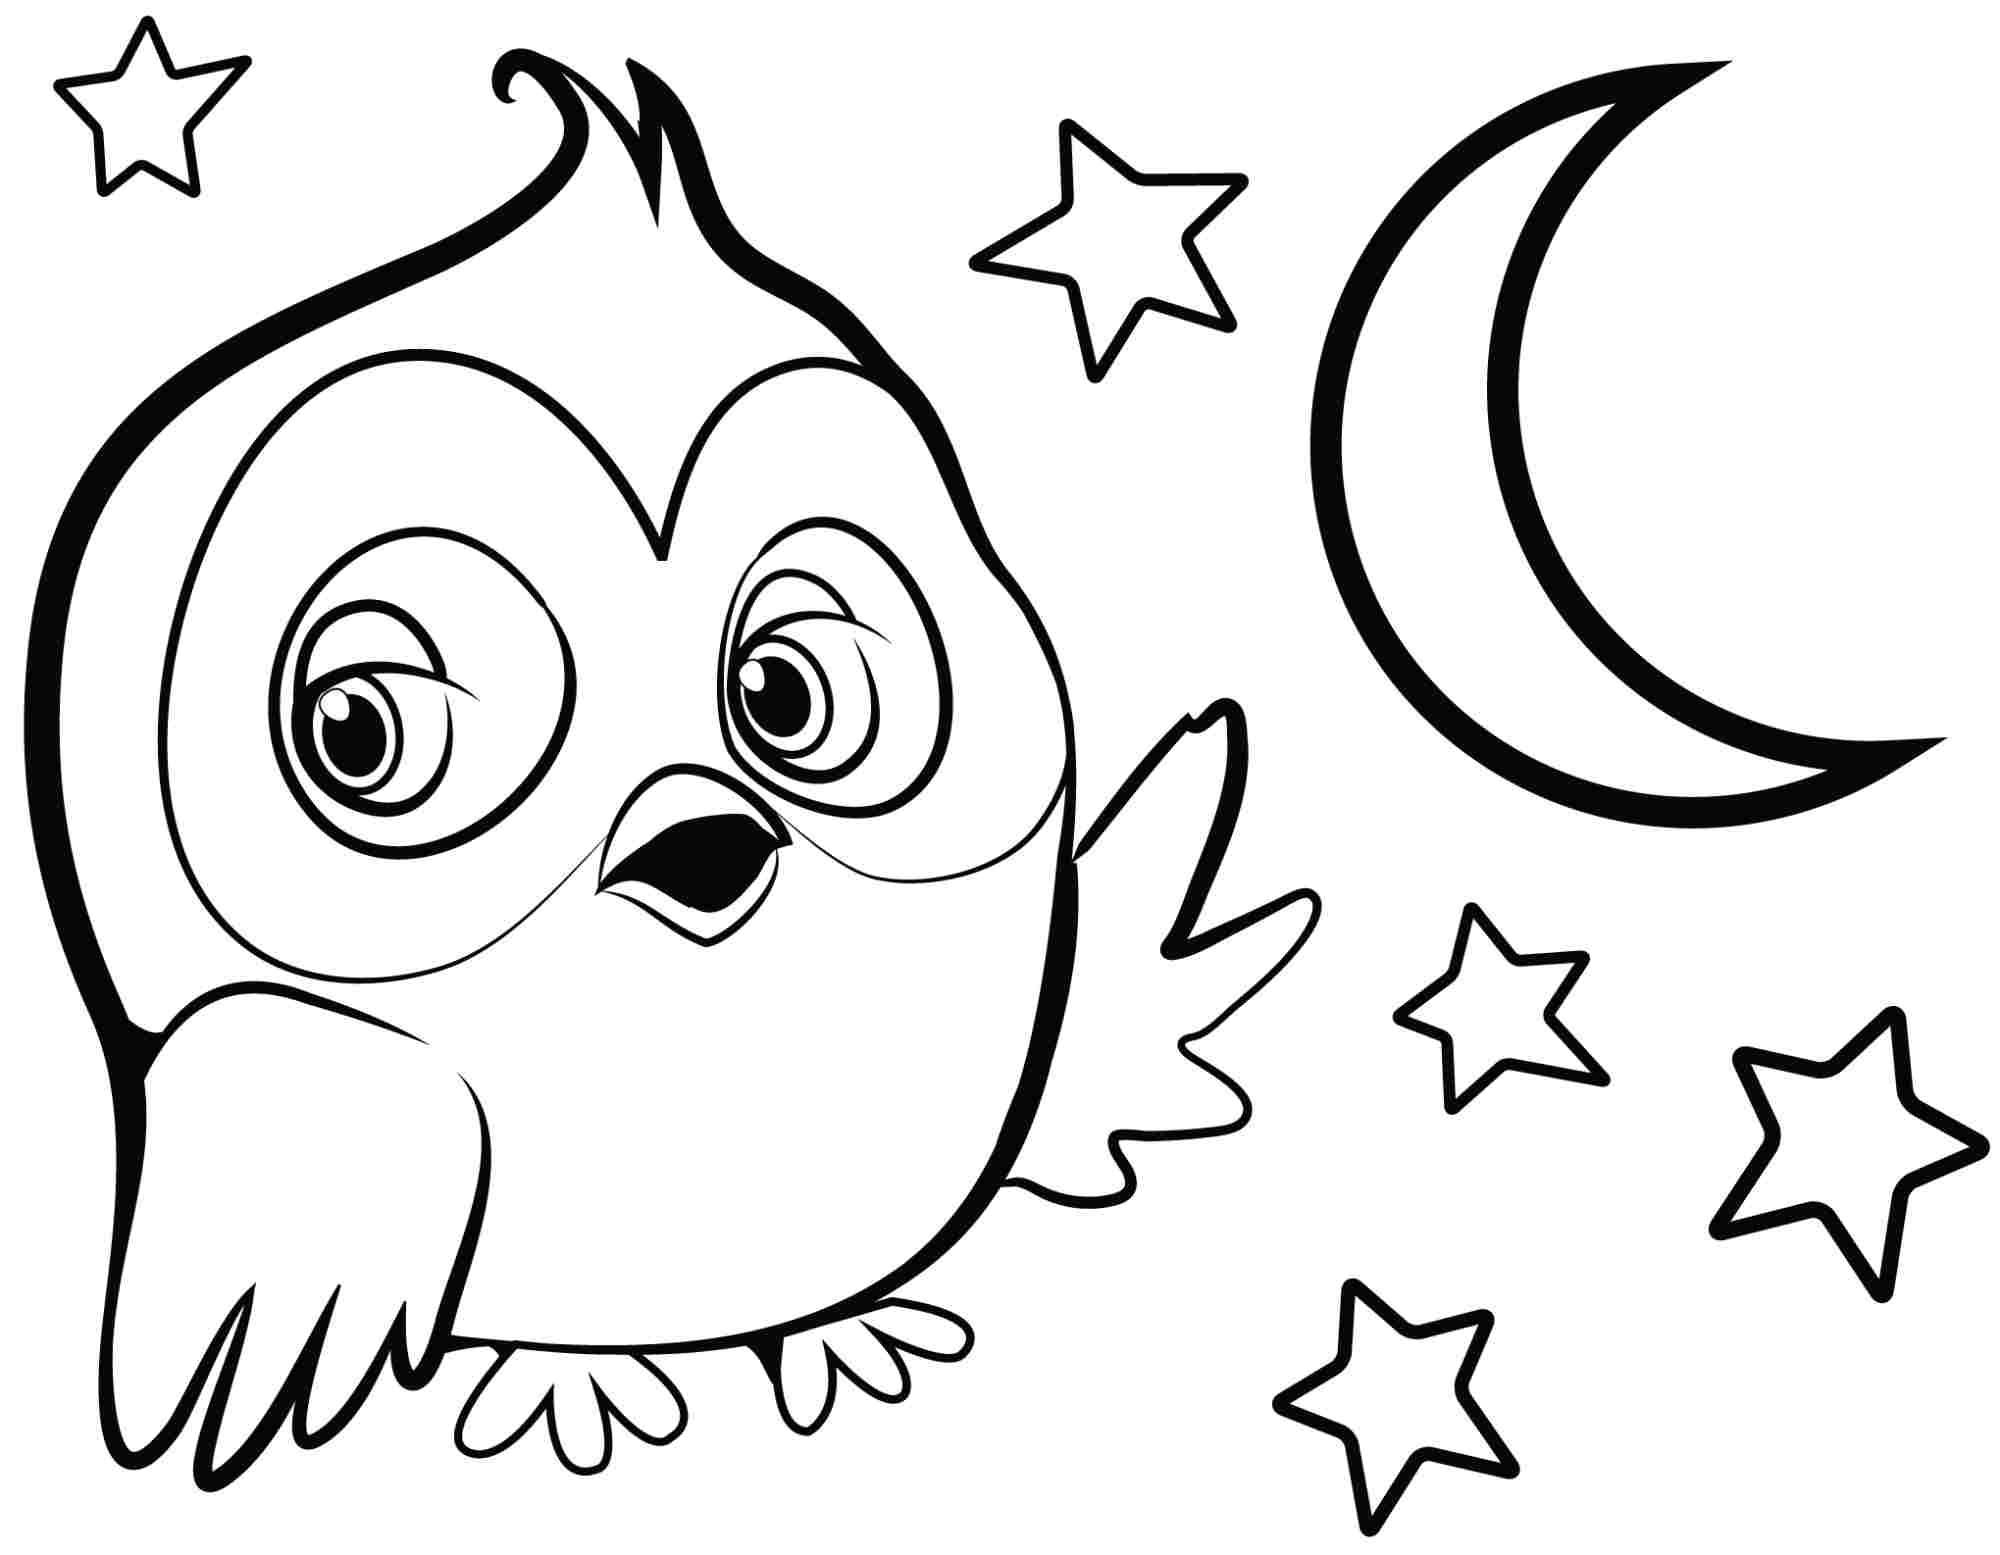 Easy Animal Coloring Pages For Kids at GetColorings.com ...